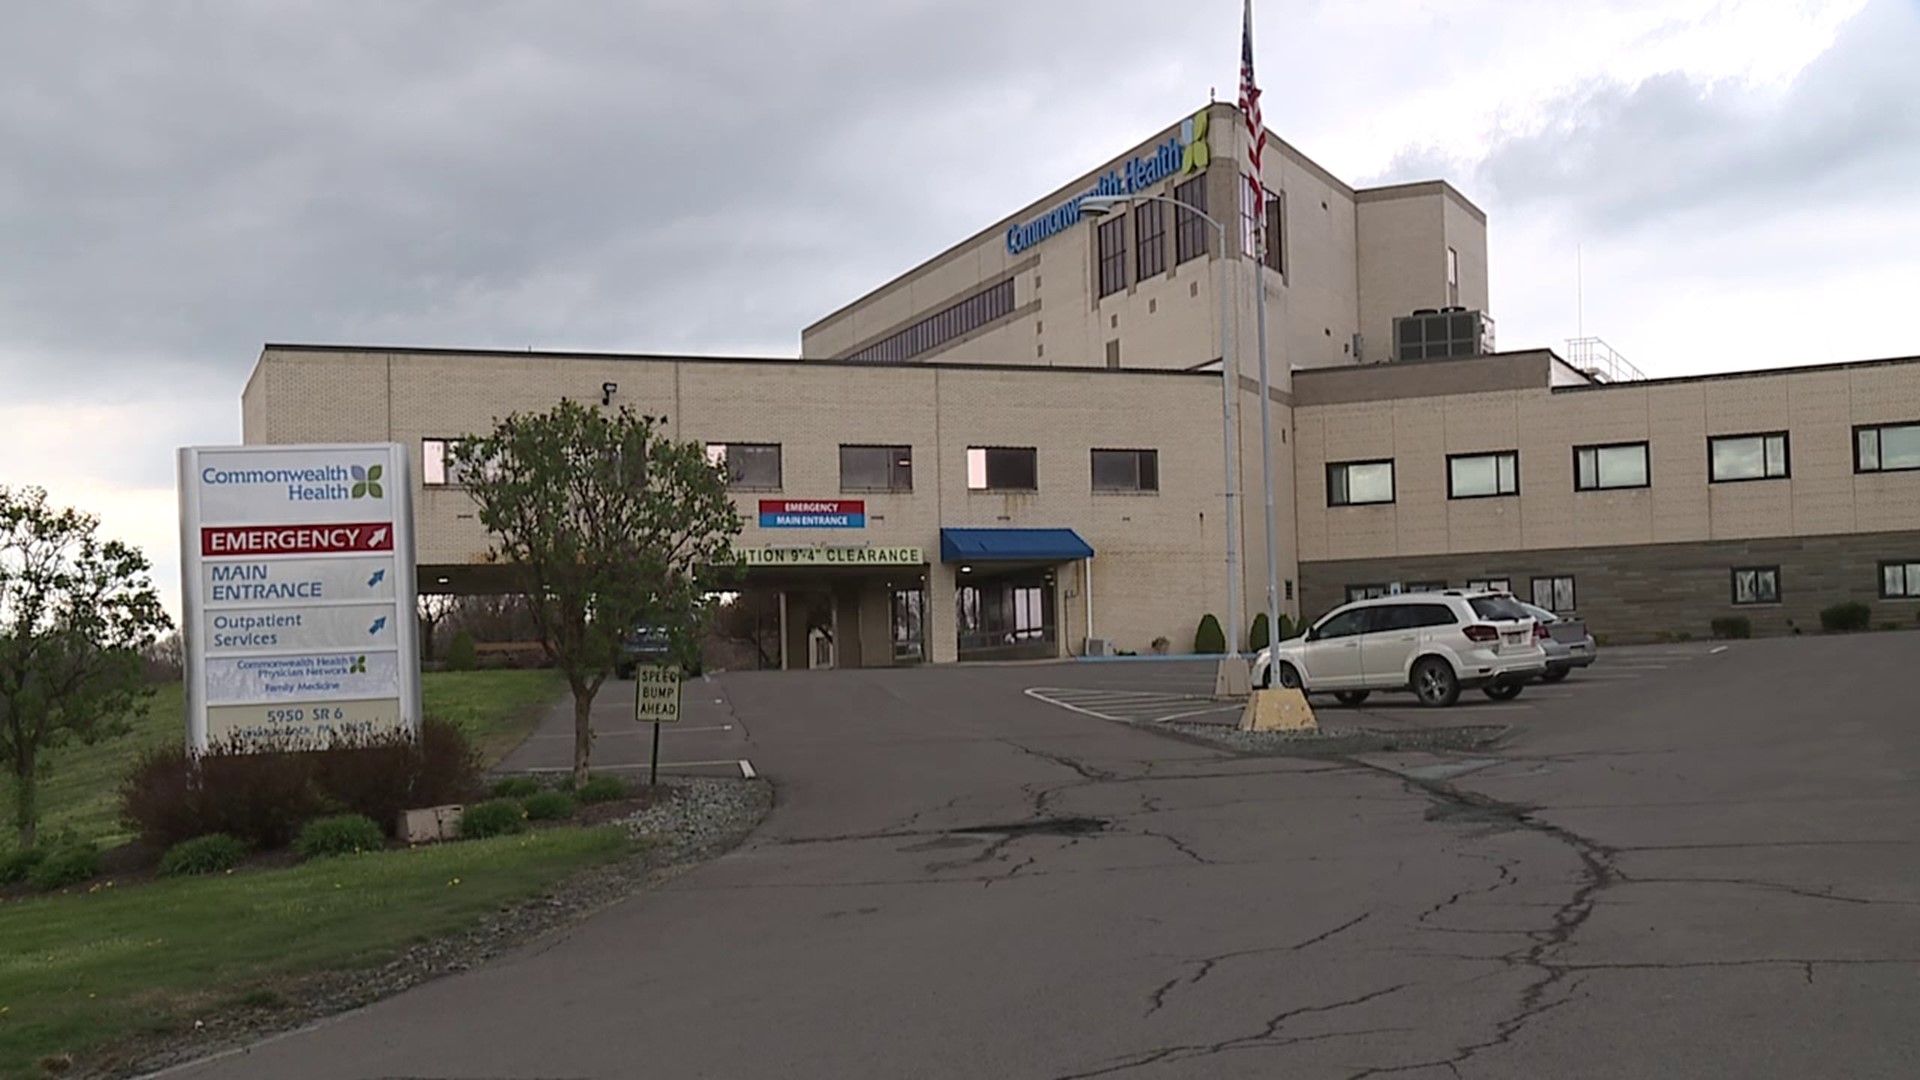 The facility plans to shut down its emergency room, causing concern for residents. They will soon be forced to travel more than 20 miles for life-saving care.